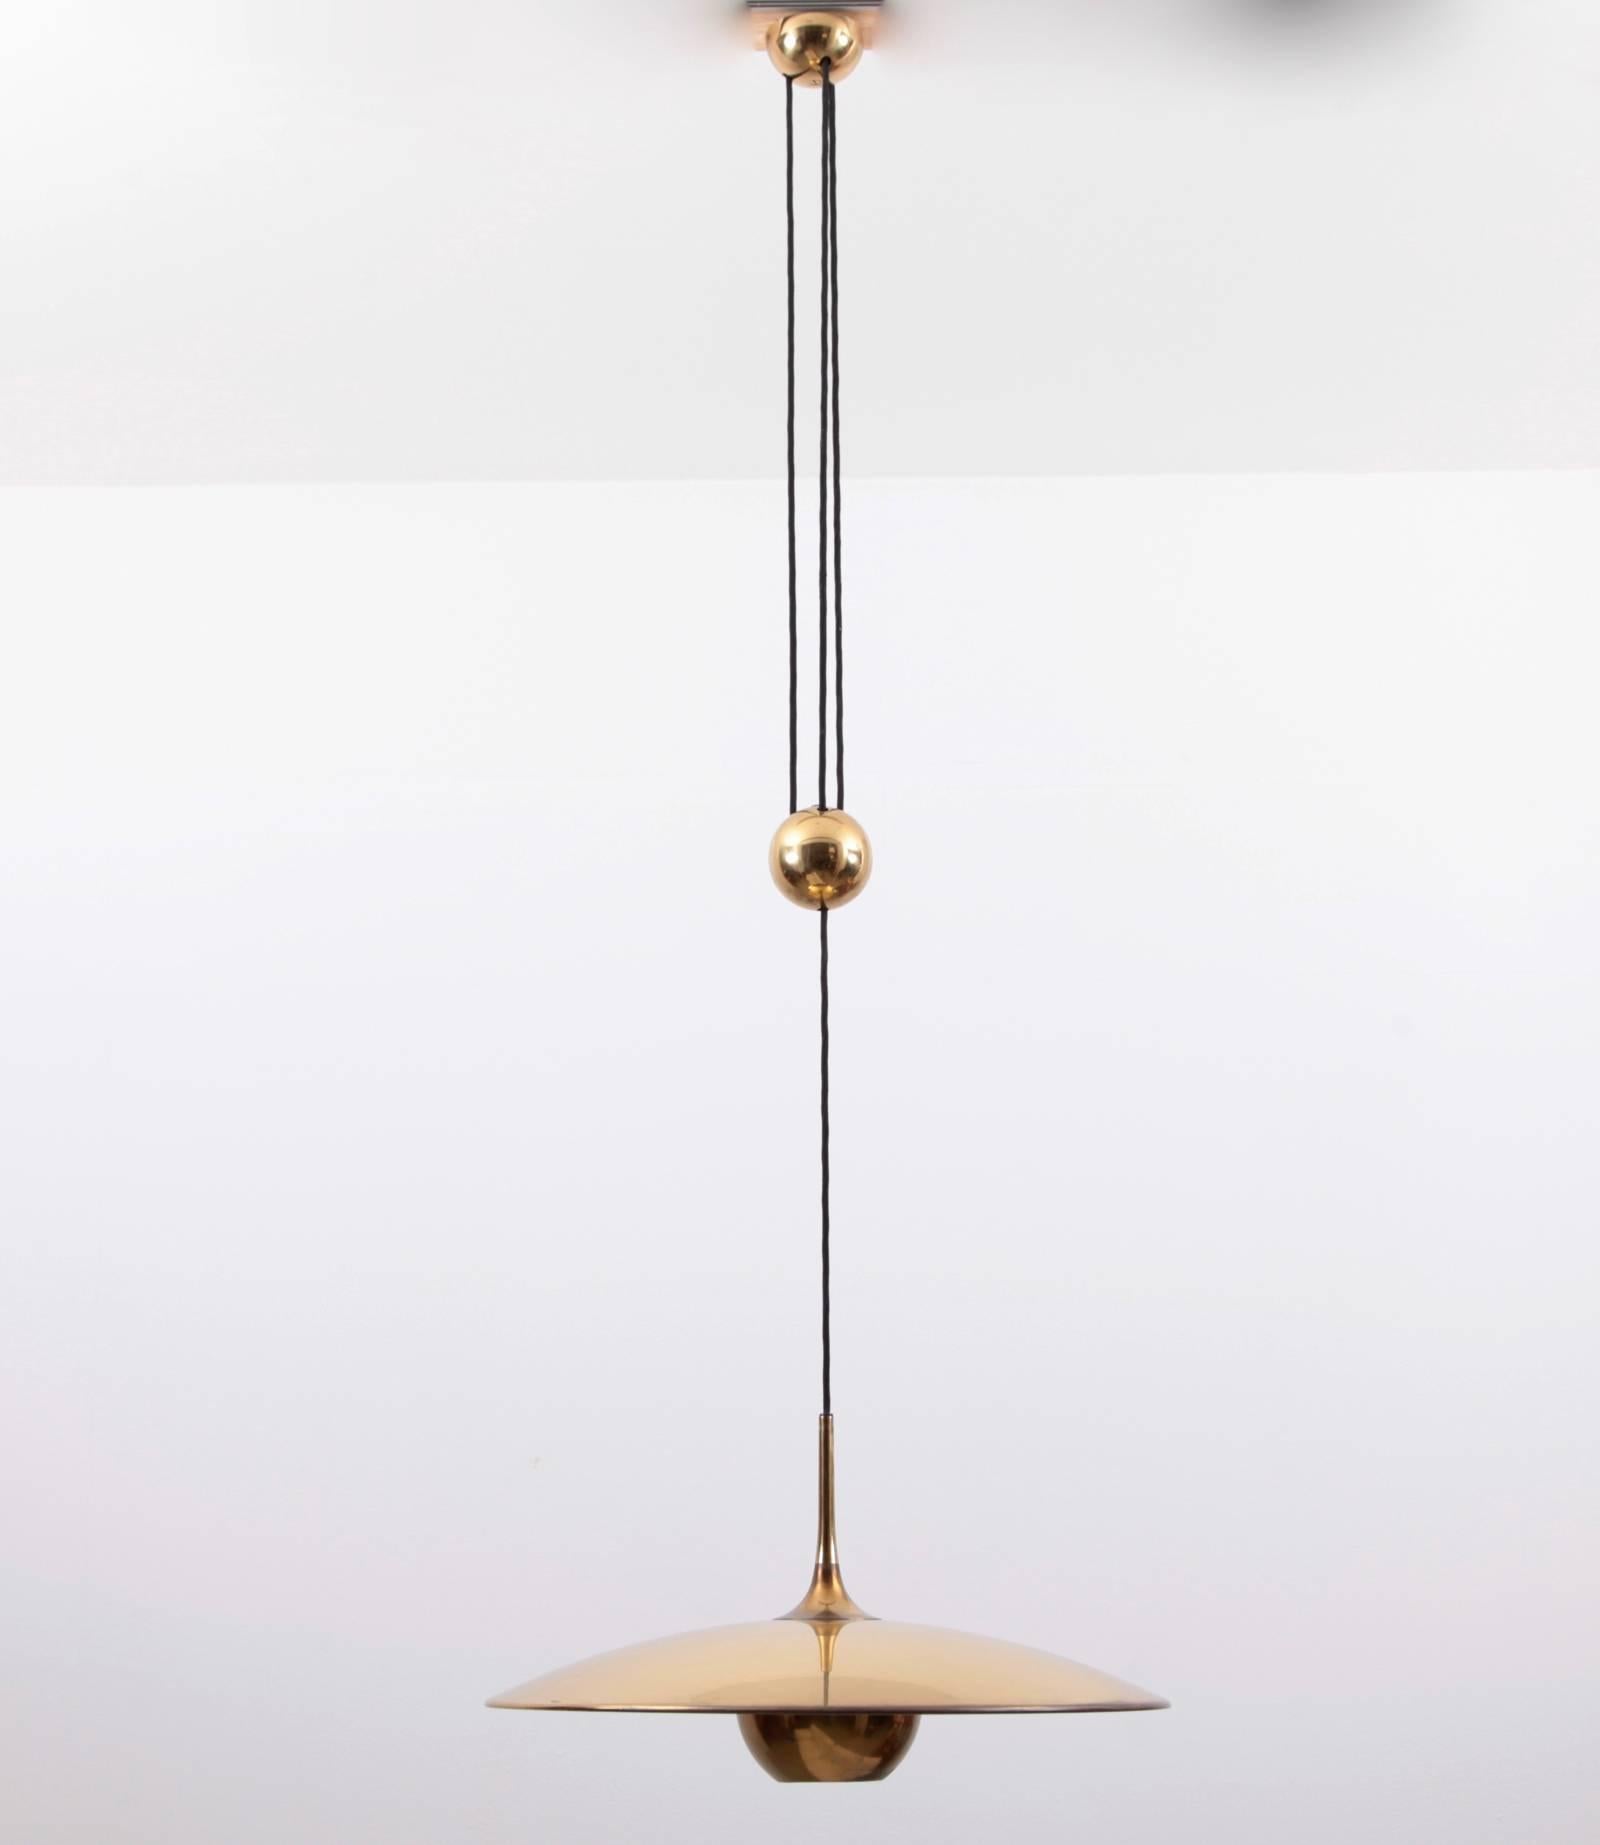 German Florian Schulz Onos 55 in Polished Brass with Centre Counterweight